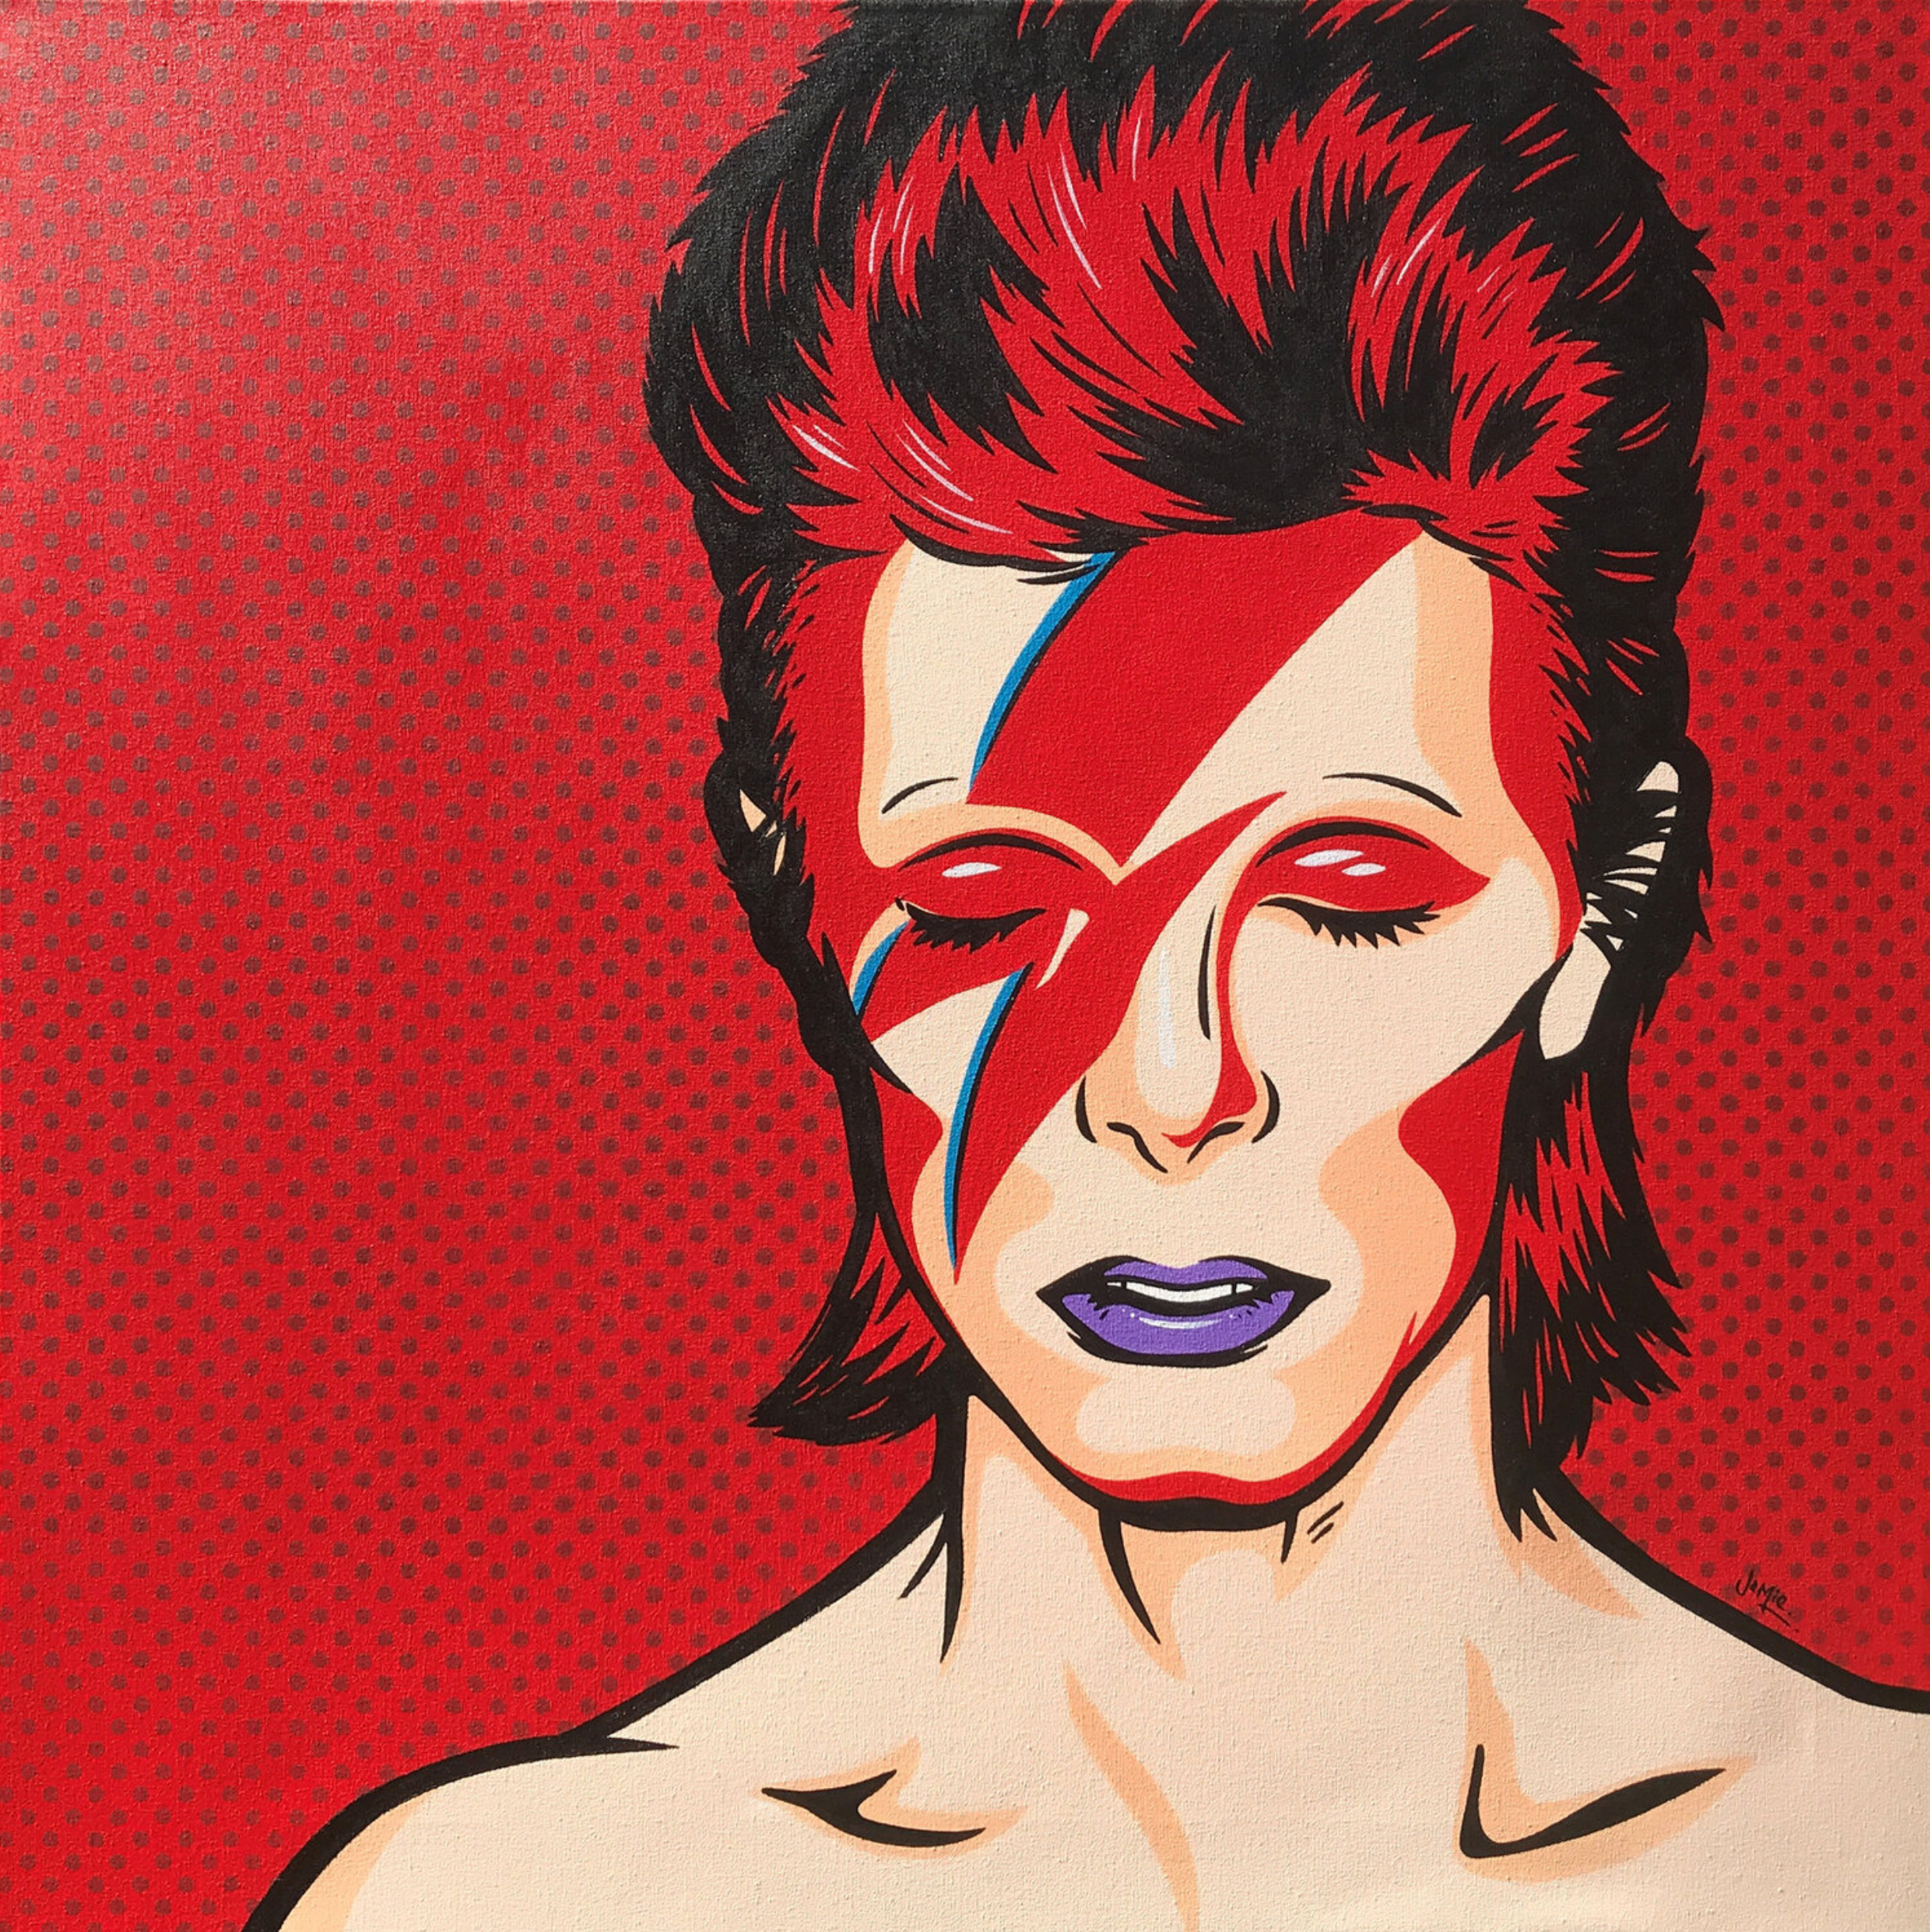 Jamie Lee's "Ziggy" comic book style pop art painting with original design, David Bowie as Aladdin Sane on red background. Hand-painted pop art version of the legendary album cover.